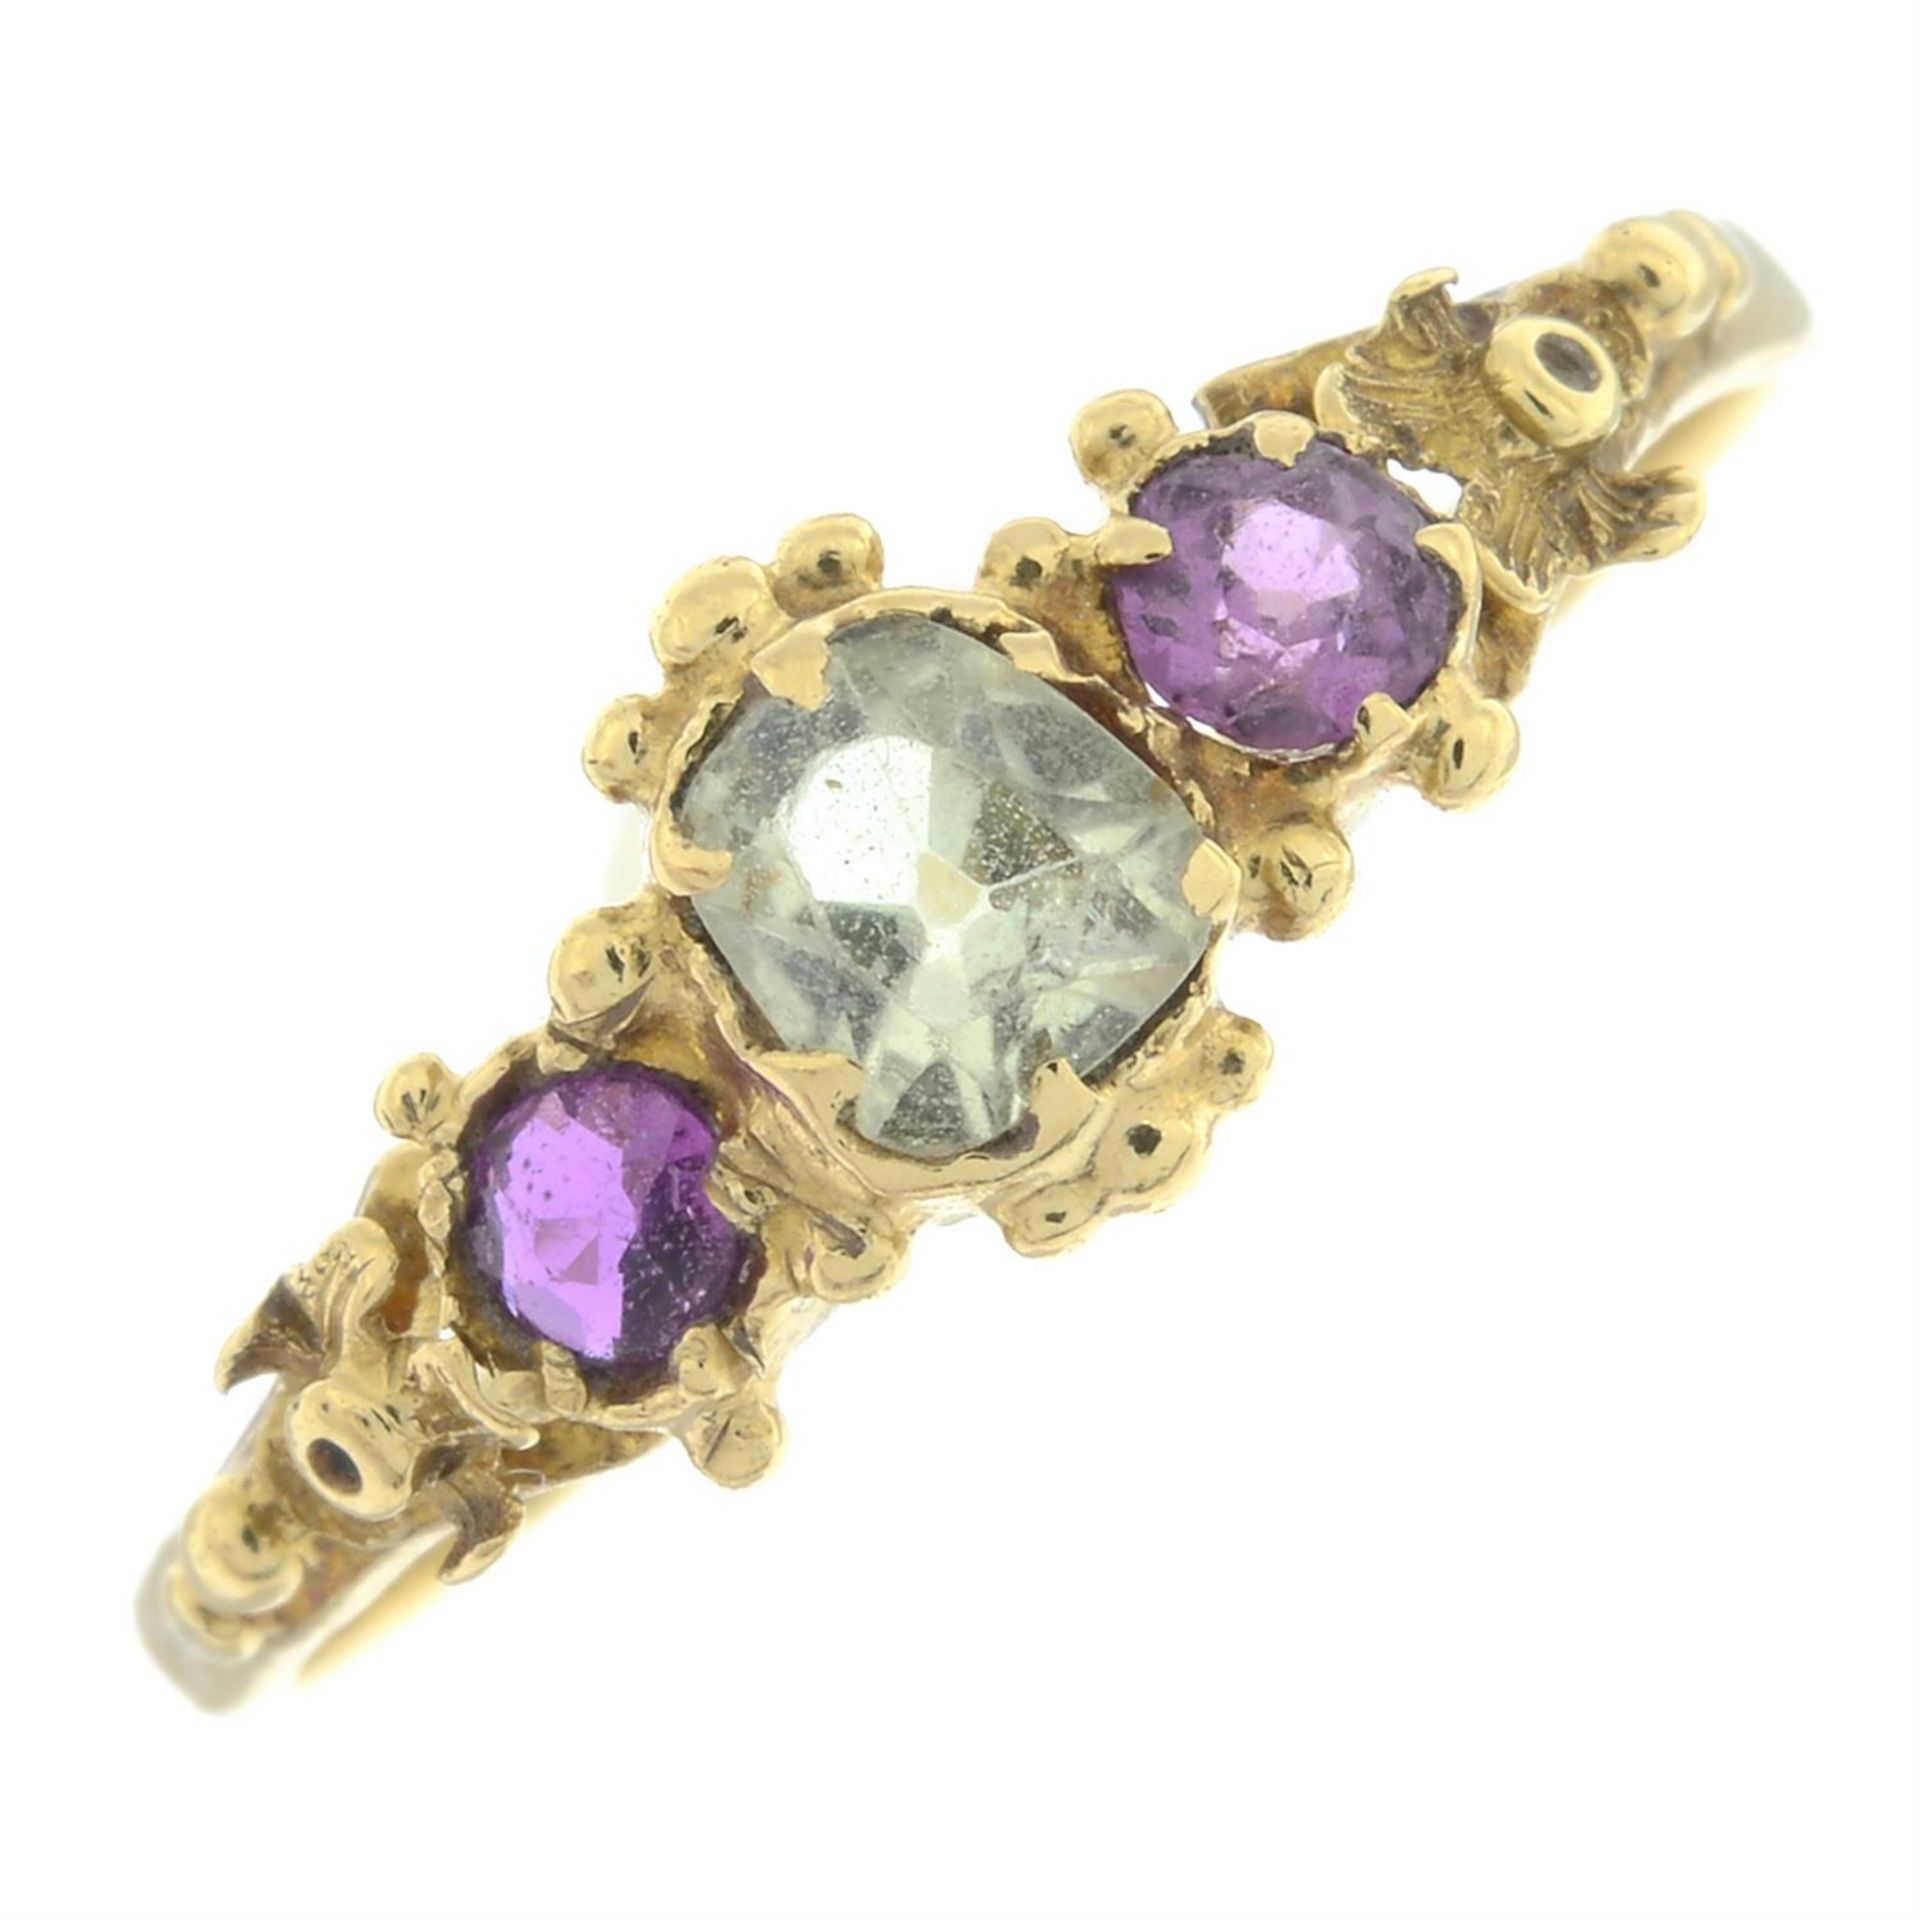 A mid to late 19th century multi-gem three stone ring.